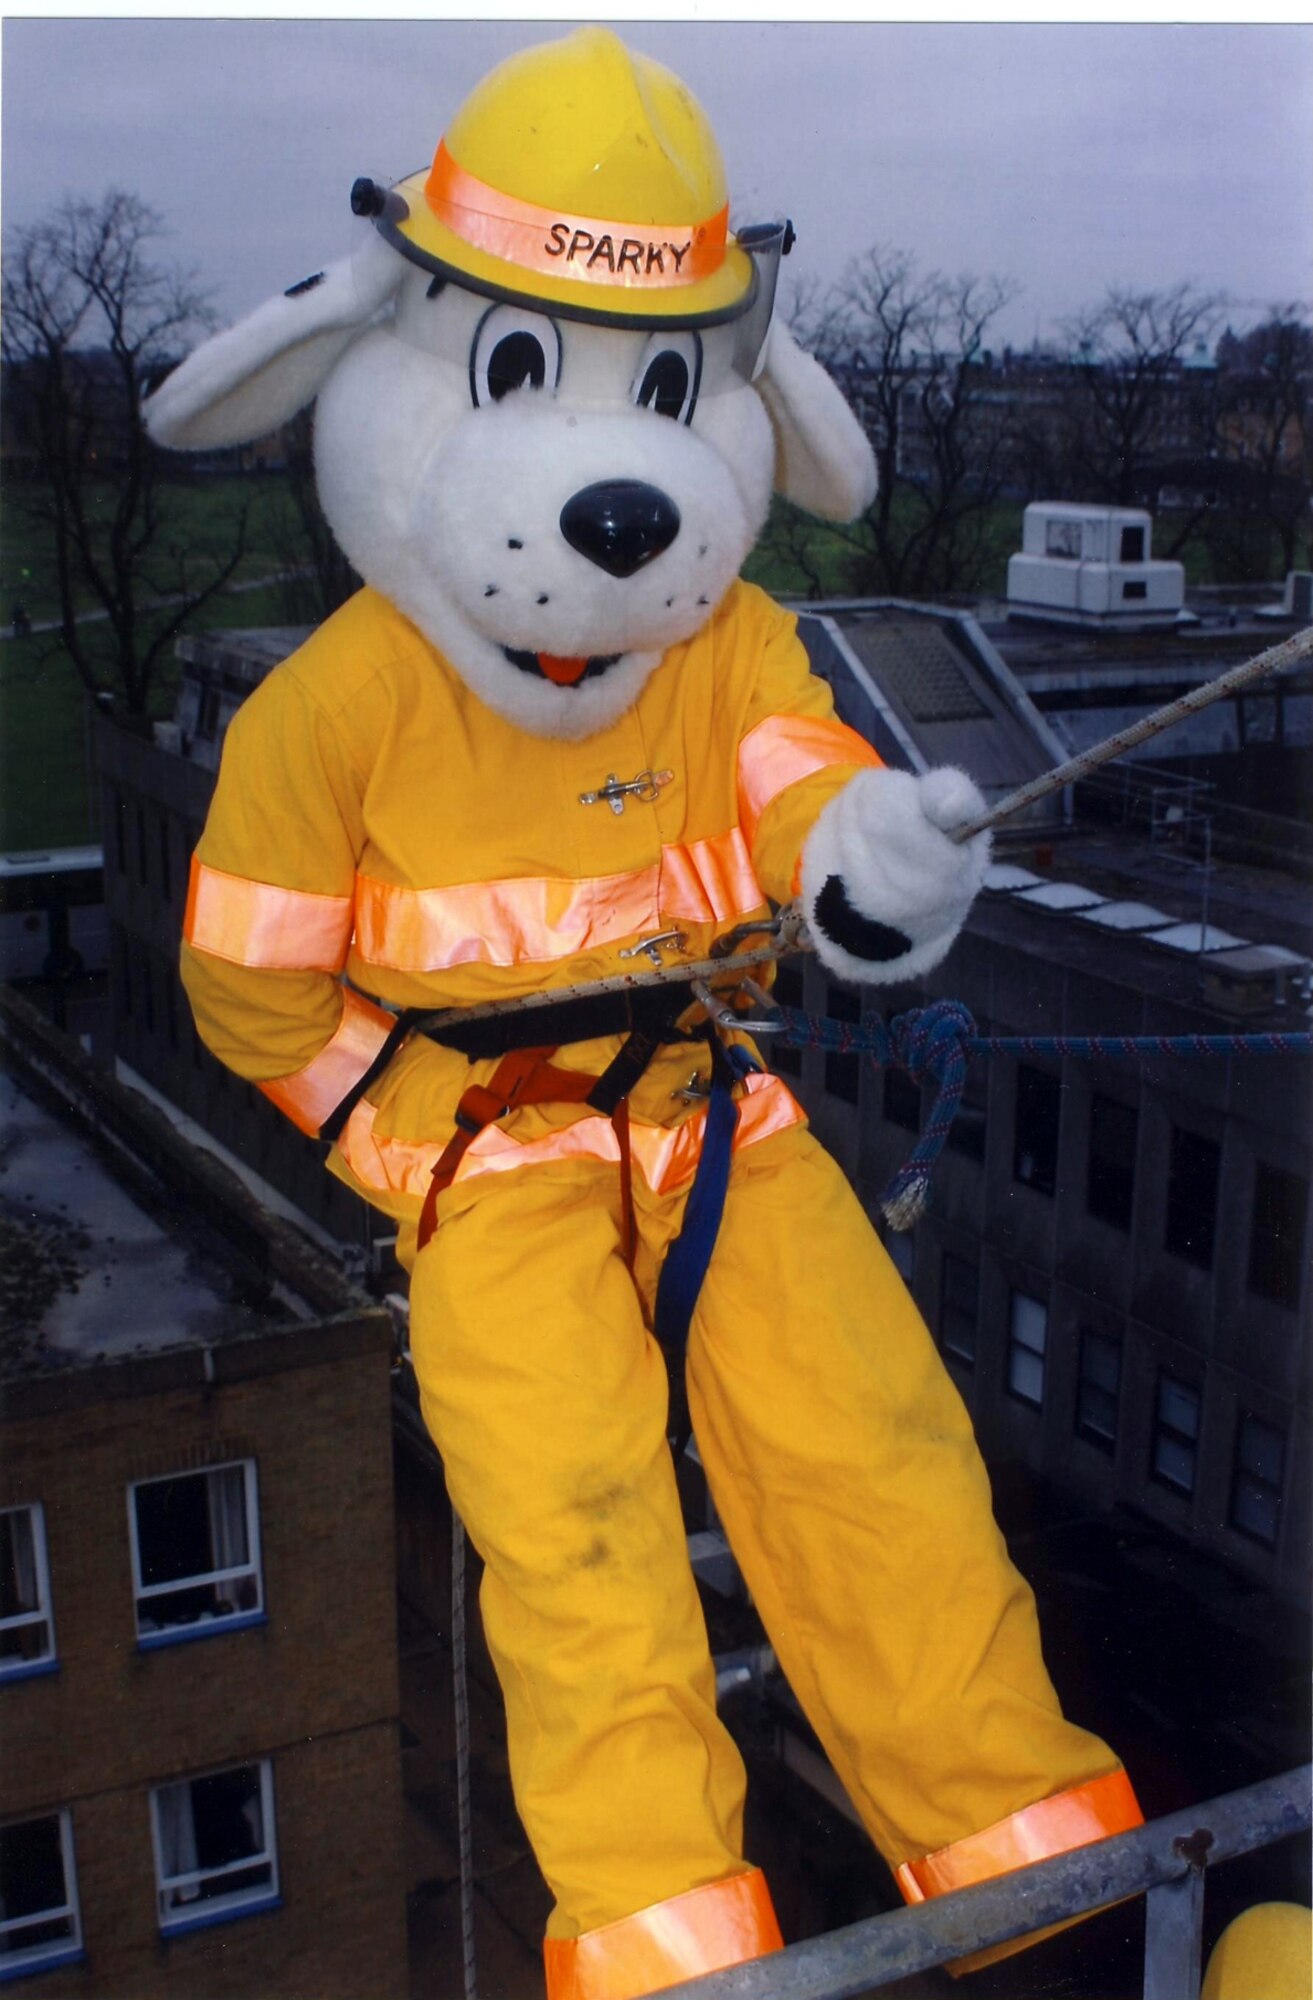 Staff Sgt. Sean Katz, 100th Civil Engineer Squadron fire Department, dressed as Sparky the Fire Dog before rappelling down an 80-foot tower at Cambridgeshire Fire Station March 16. He joined 19 British firefighters, from fire stations in the local area, to help raise money for a children's cancer charity. (Courtesy photo)